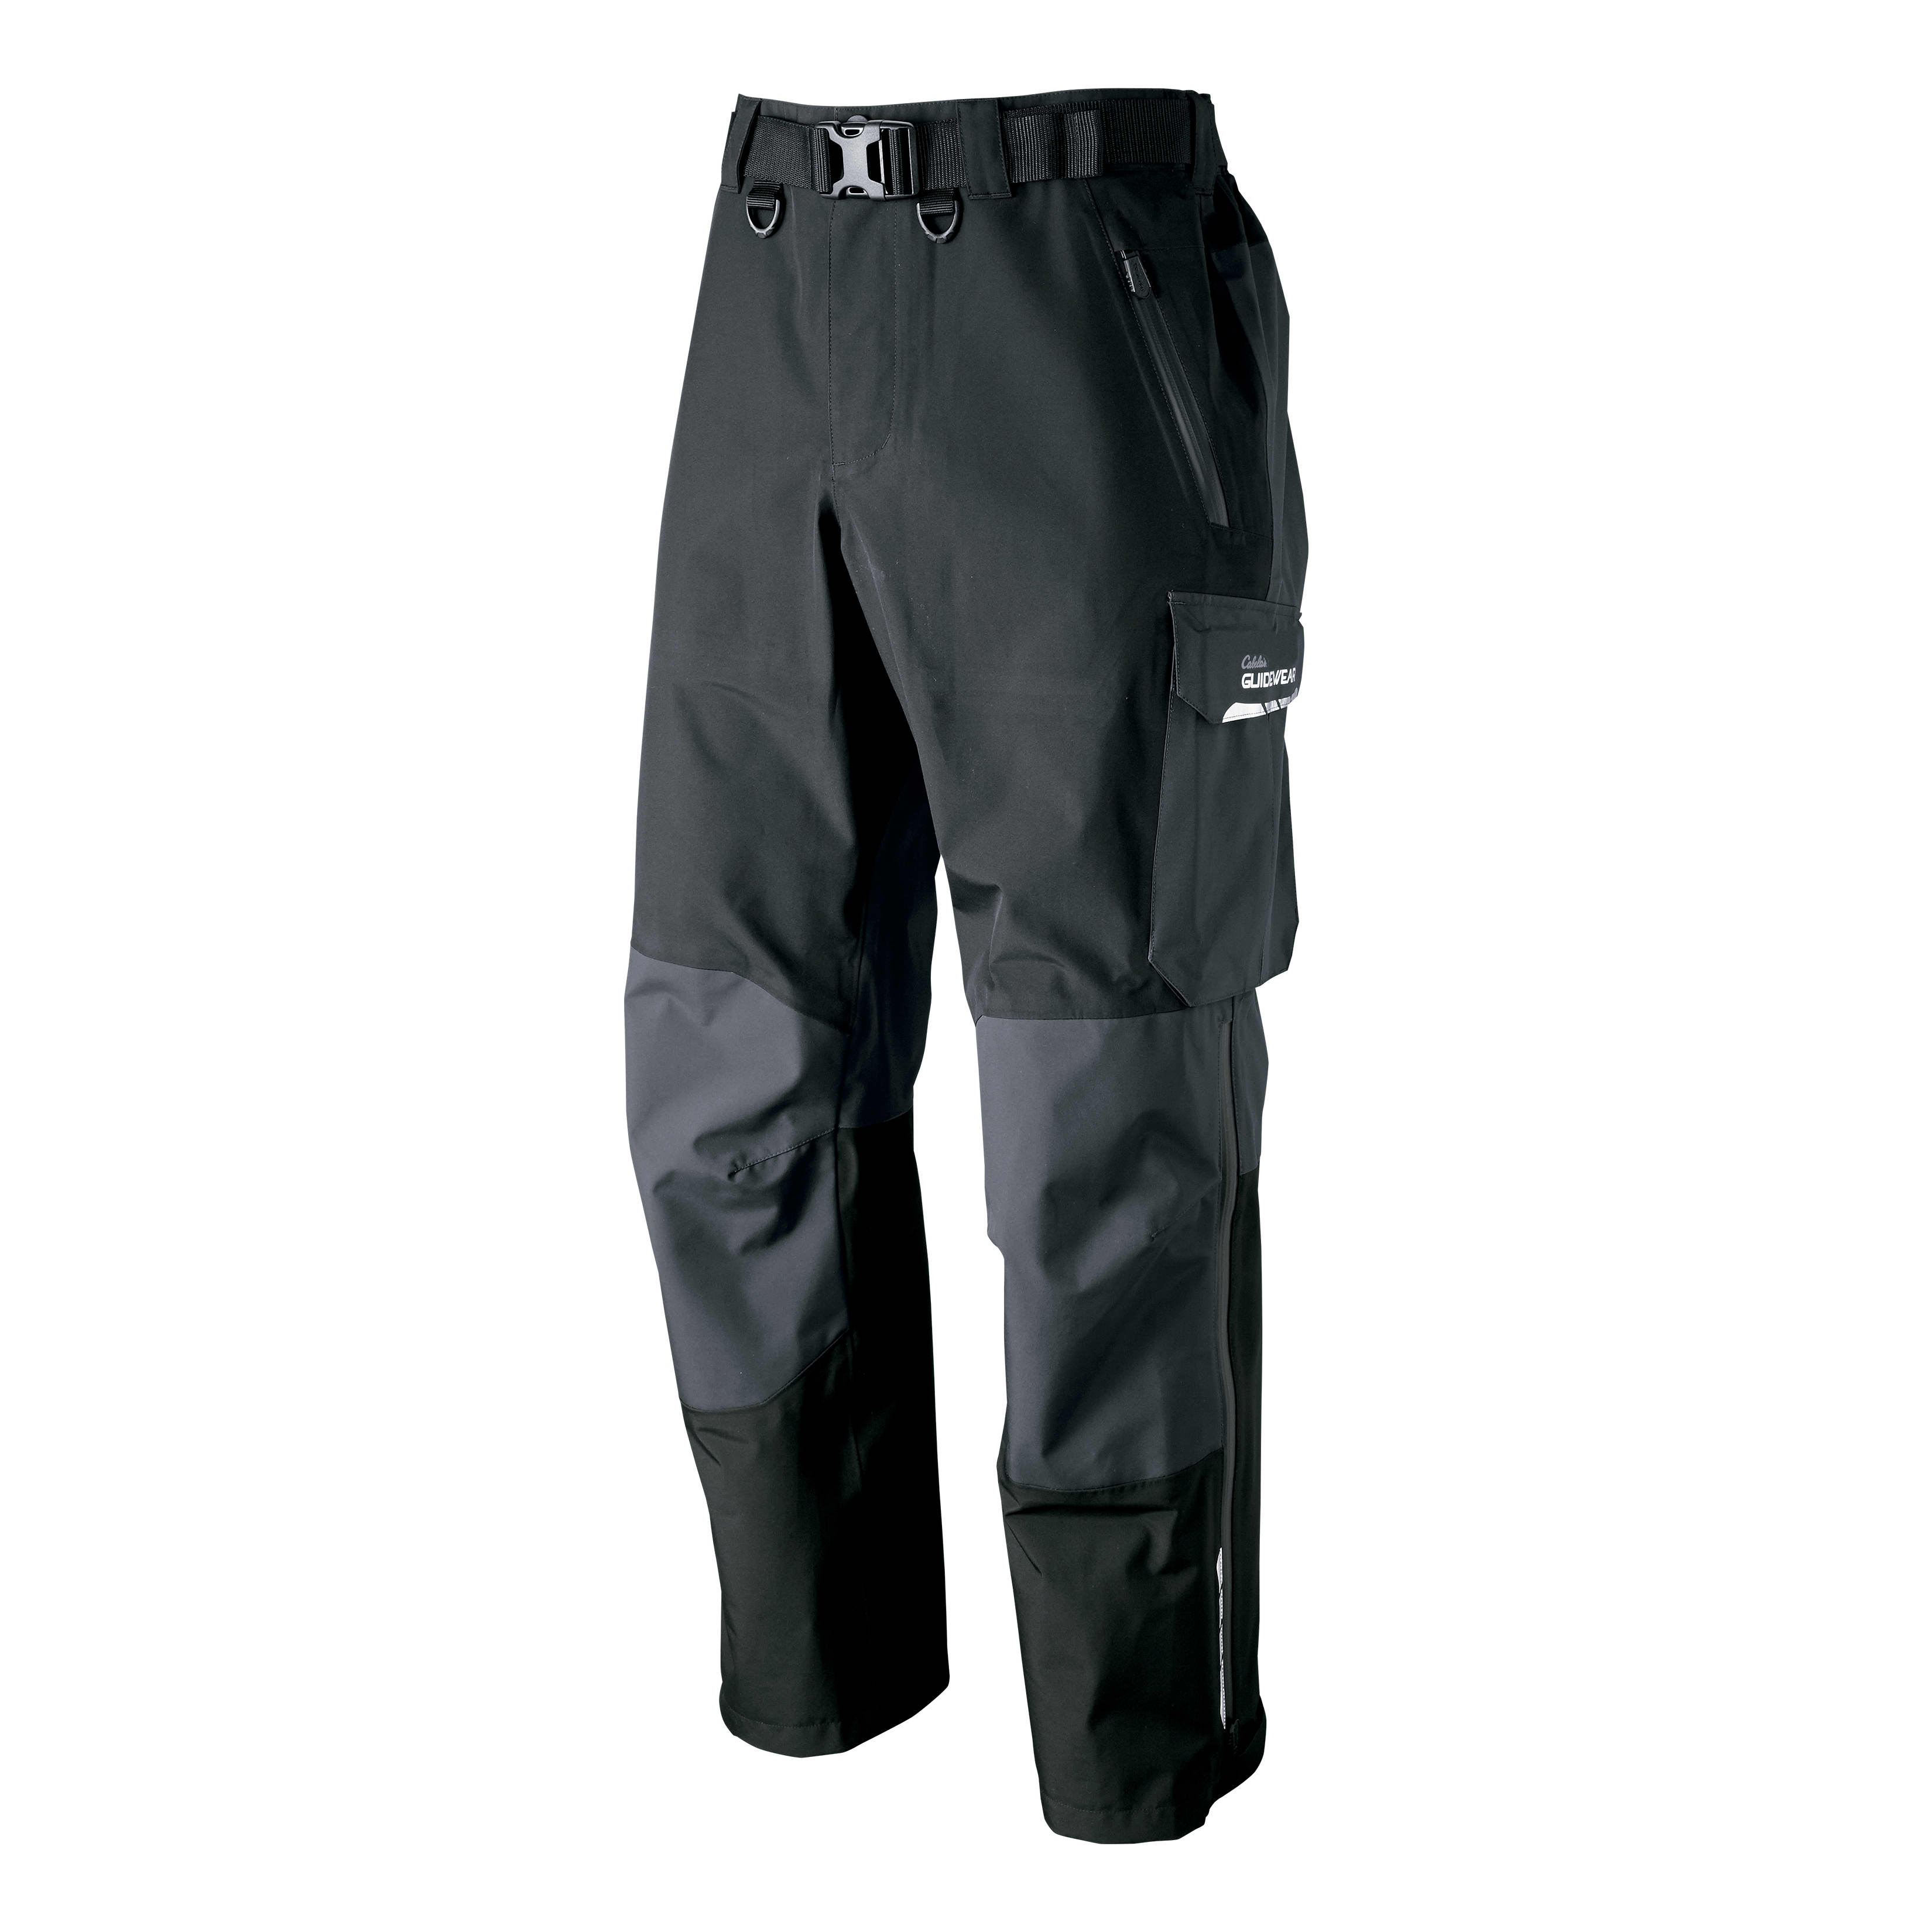 Cabela’s Guidewear® Angler Pants with GORE-TEX®